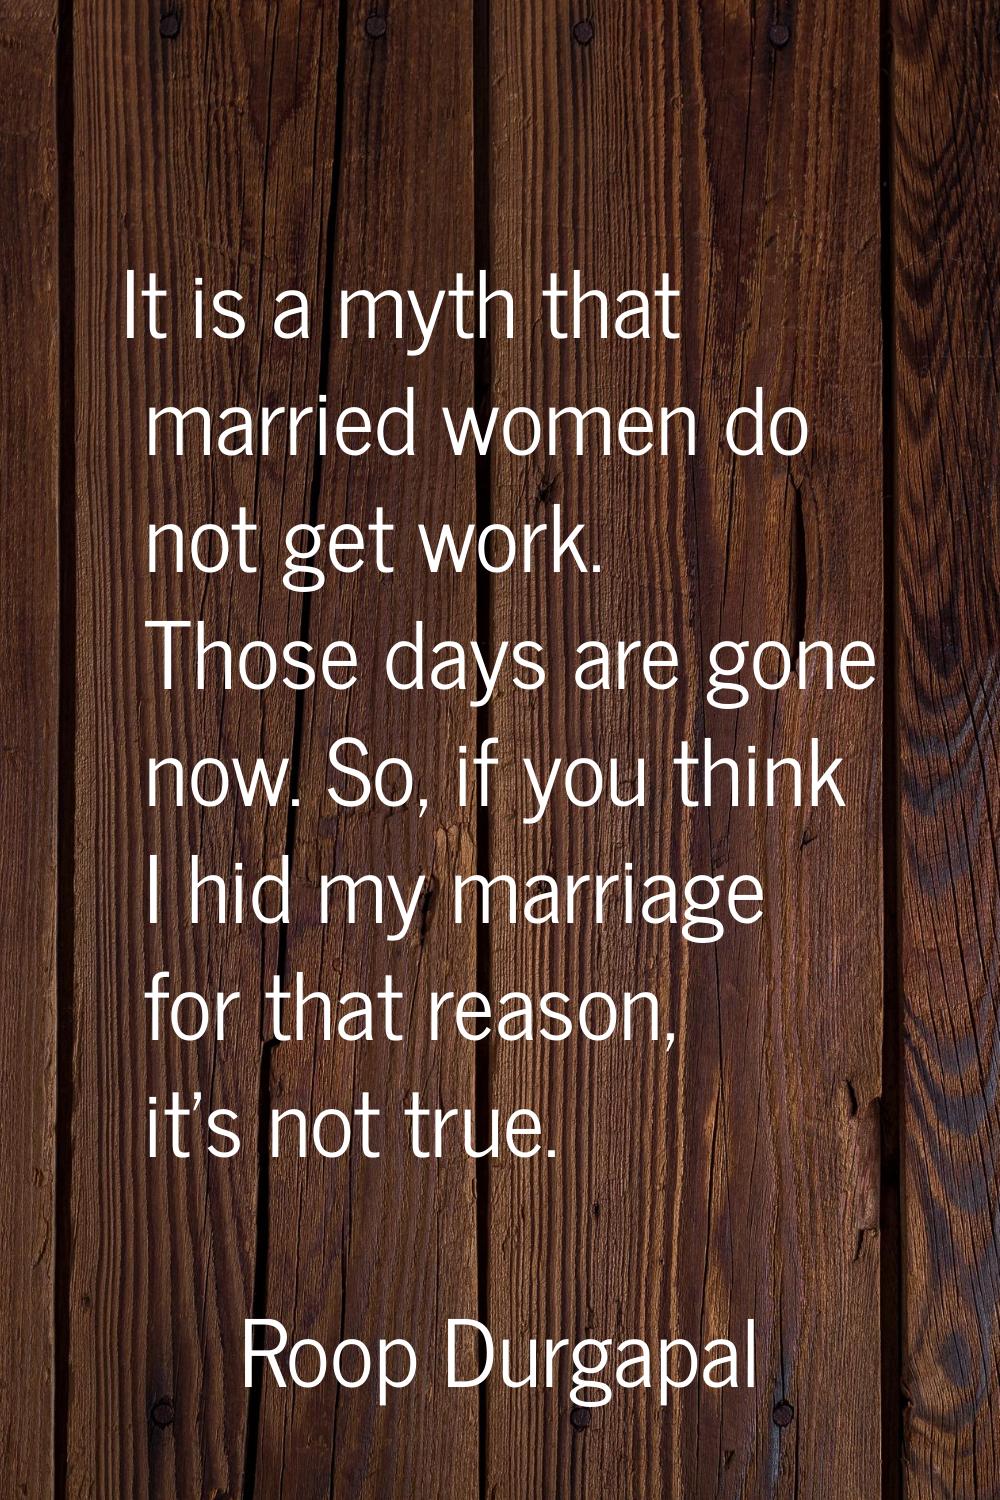 It is a myth that married women do not get work. Those days are gone now. So, if you think I hid my